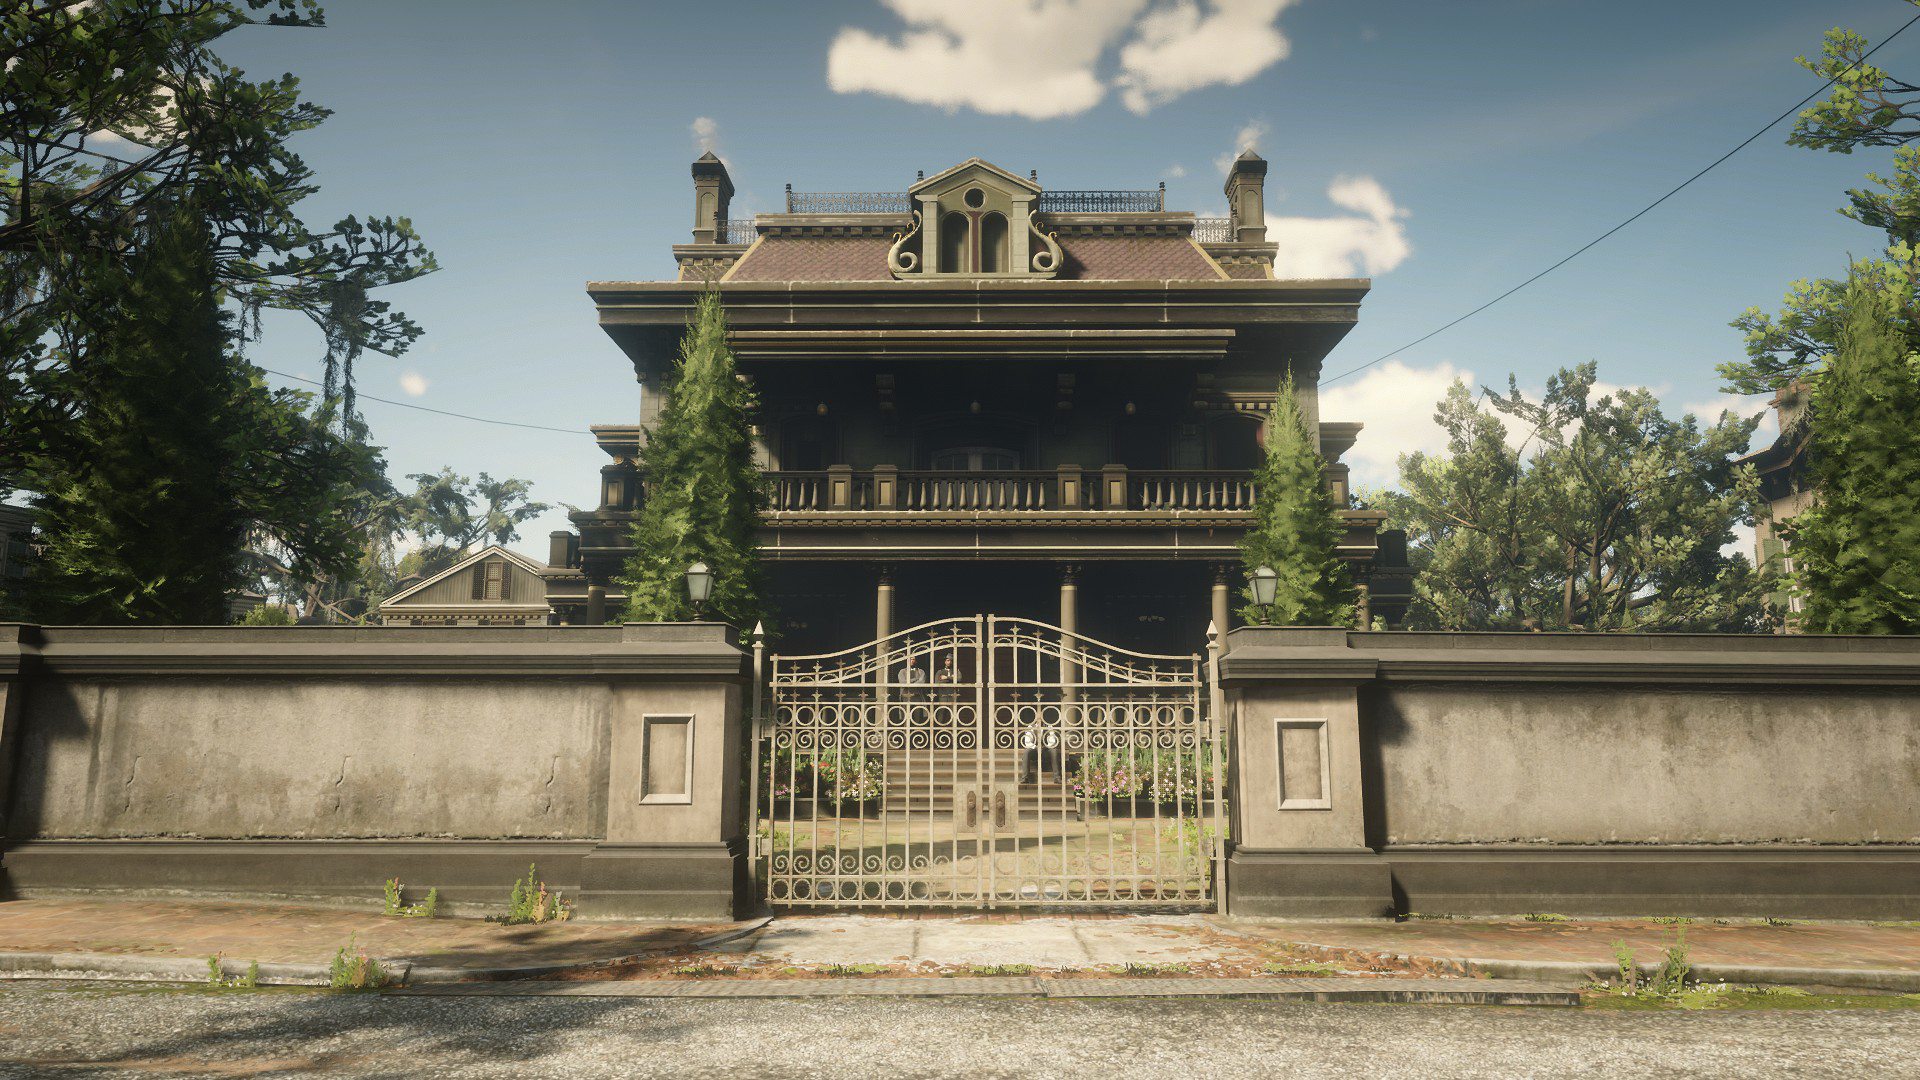 Open All Interiors Red Dead Redemption 2